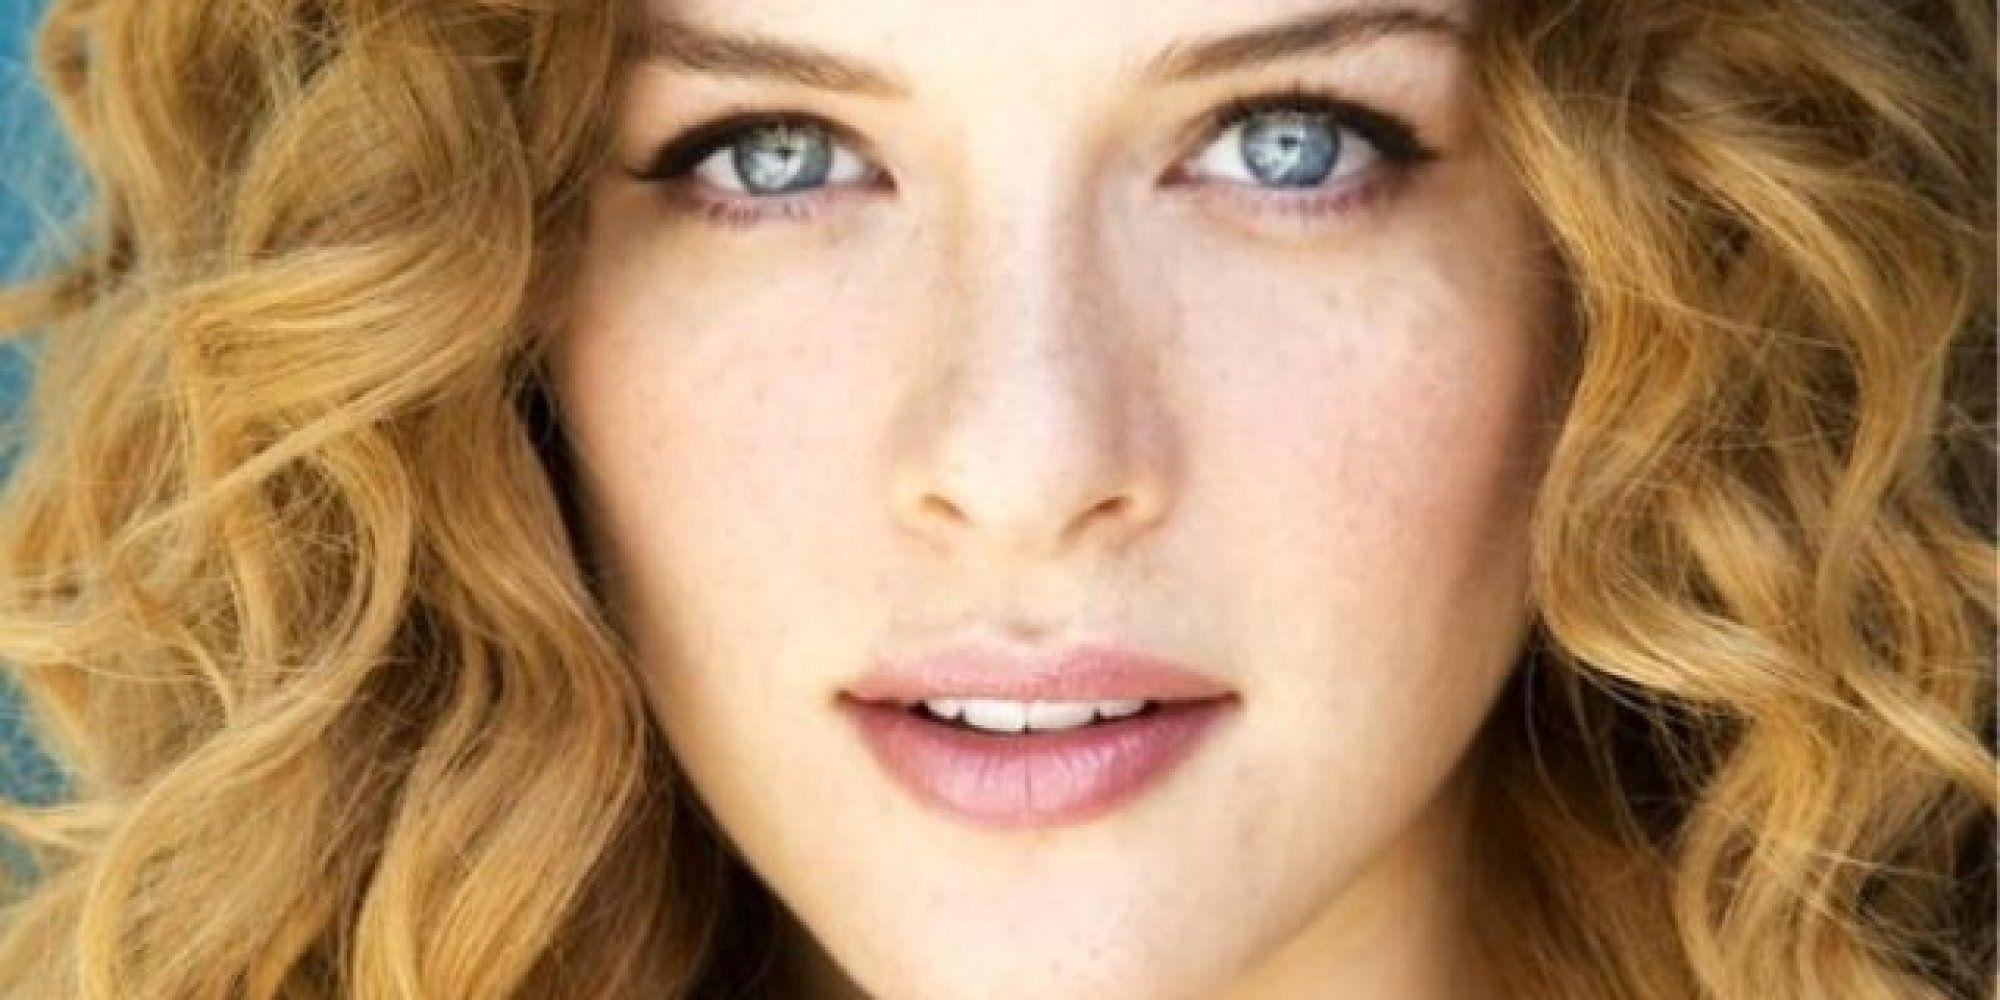 Actress Rachelle Lefevre Takes On Car Idlers, Pollution